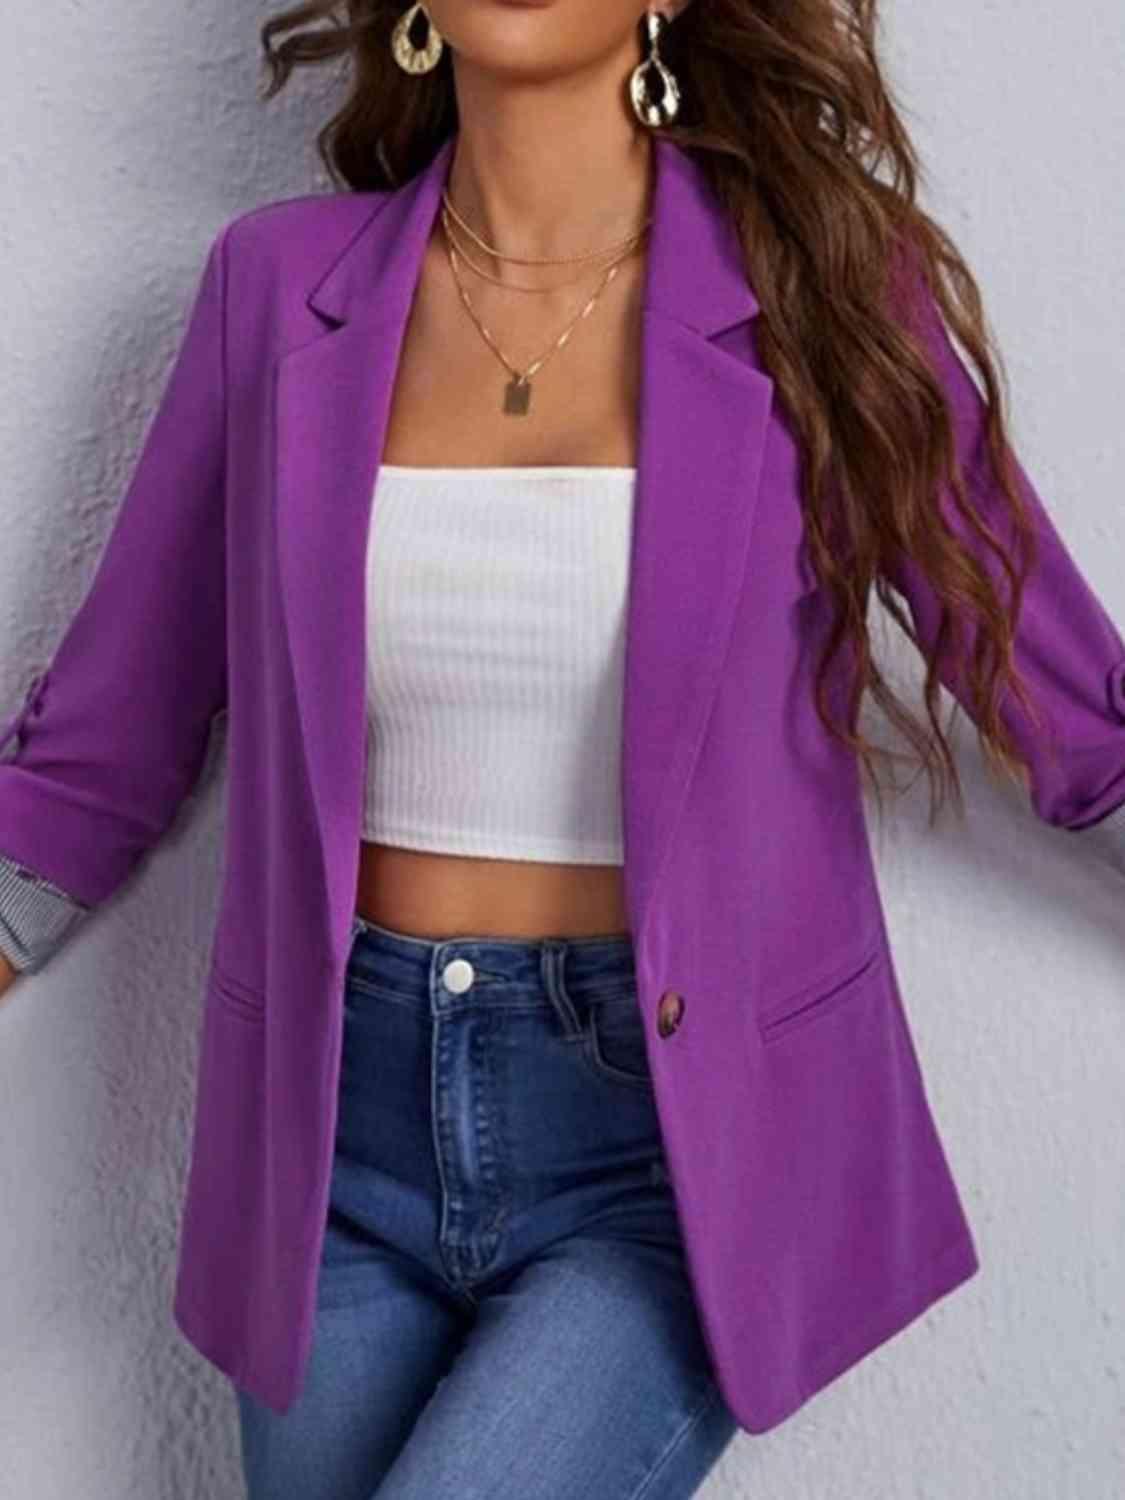 a woman wearing a purple blazer and jeans